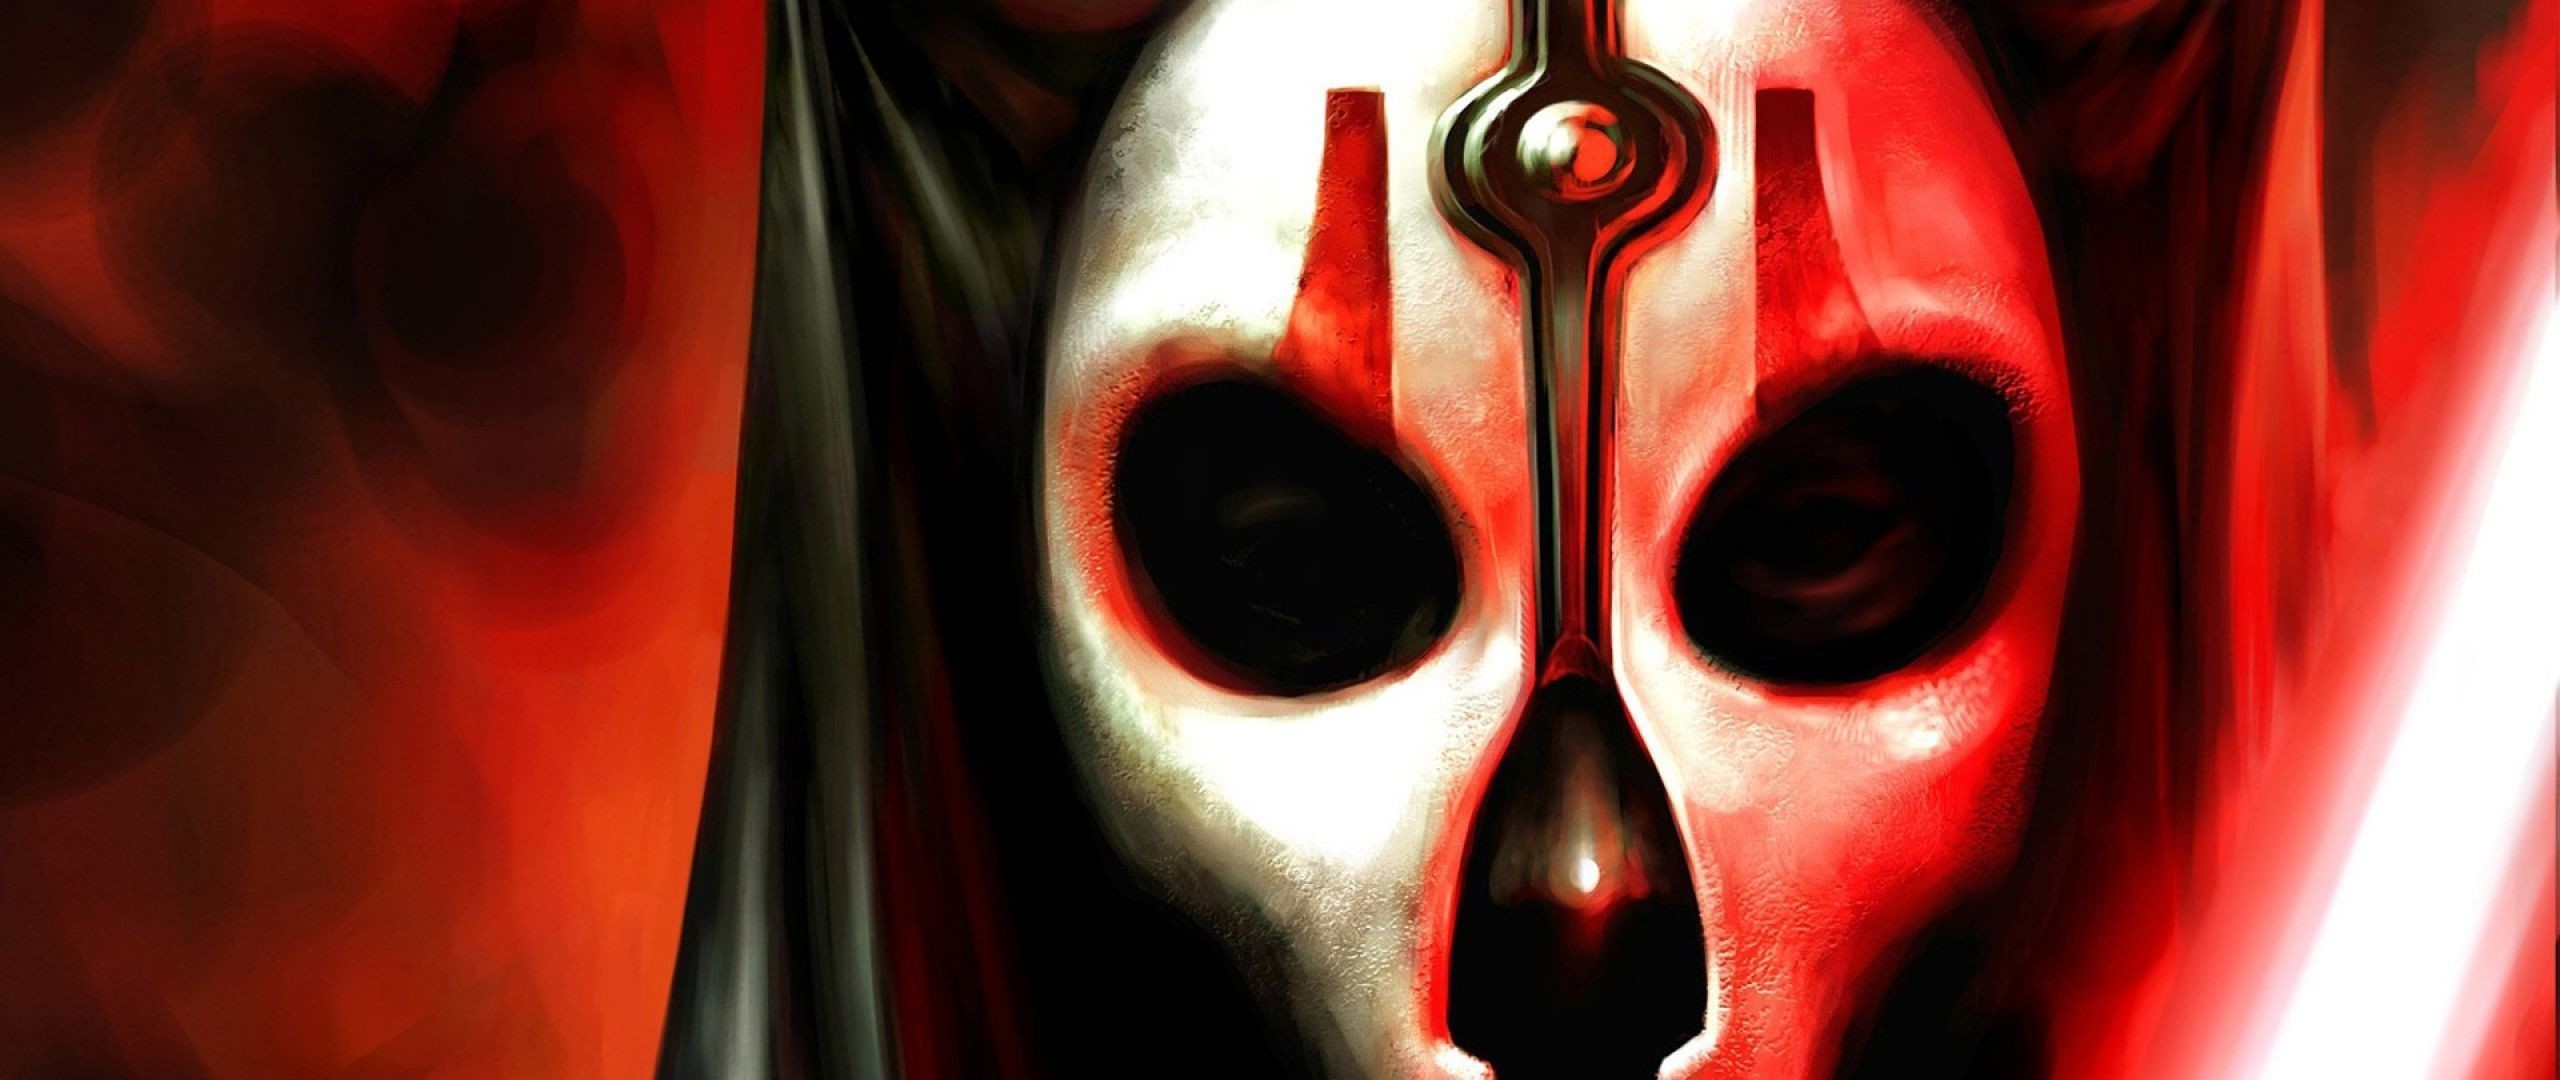 2560x1080   21:9 TV Knights of the old republic Wallpapers HD .